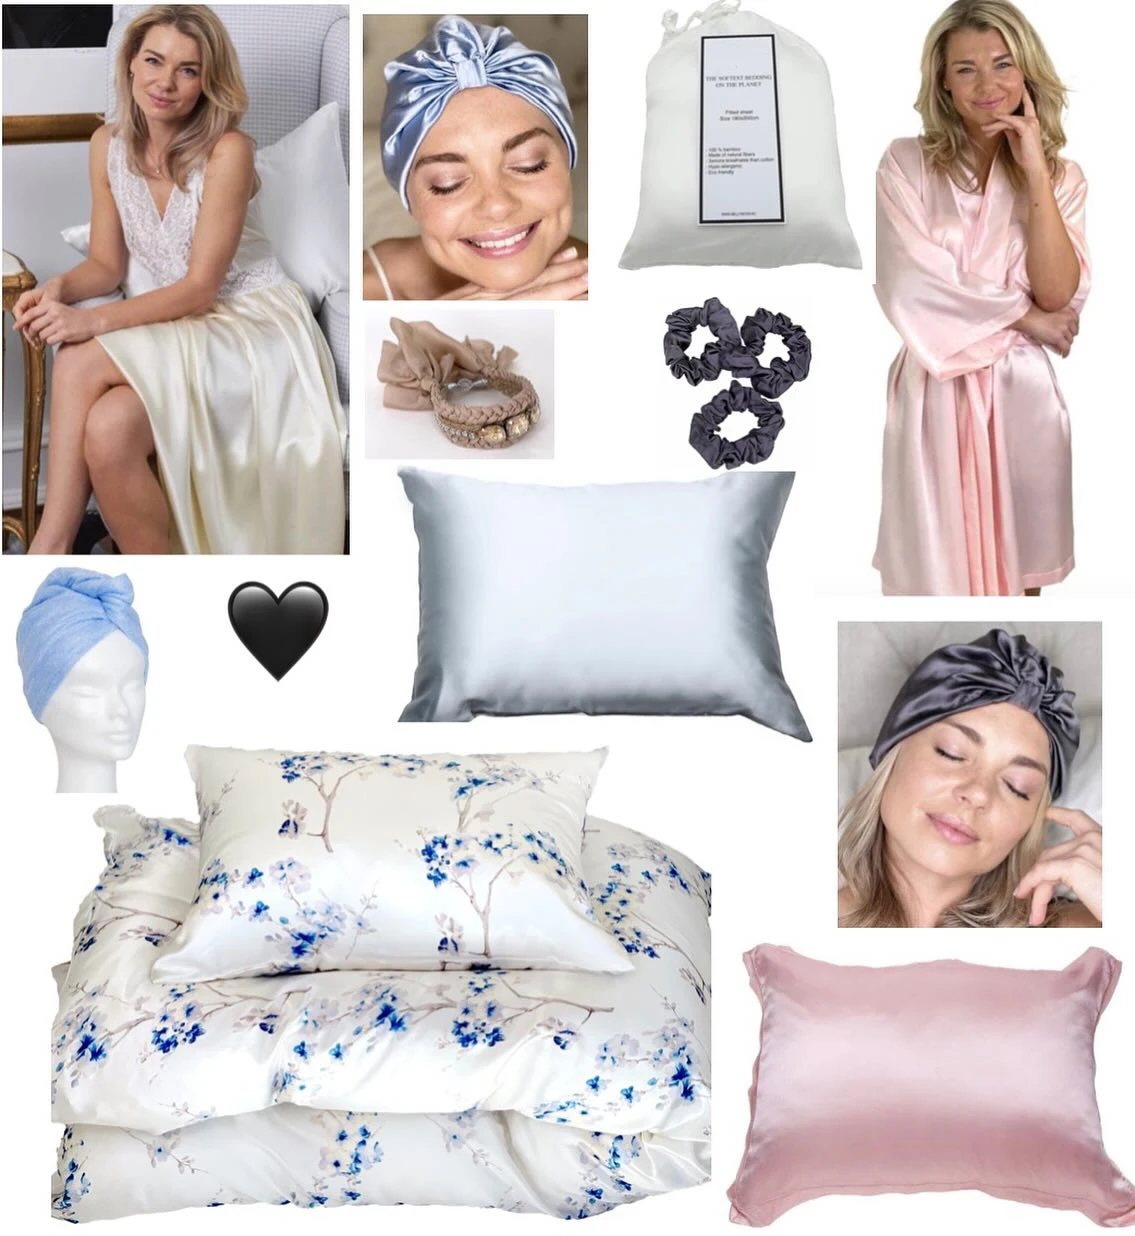 Wholesale Pure Mulberry Silk Pillowcase Set with Eye Mask Anti-Decubitus Features Printed Dot Leaf Pattern for Sleep